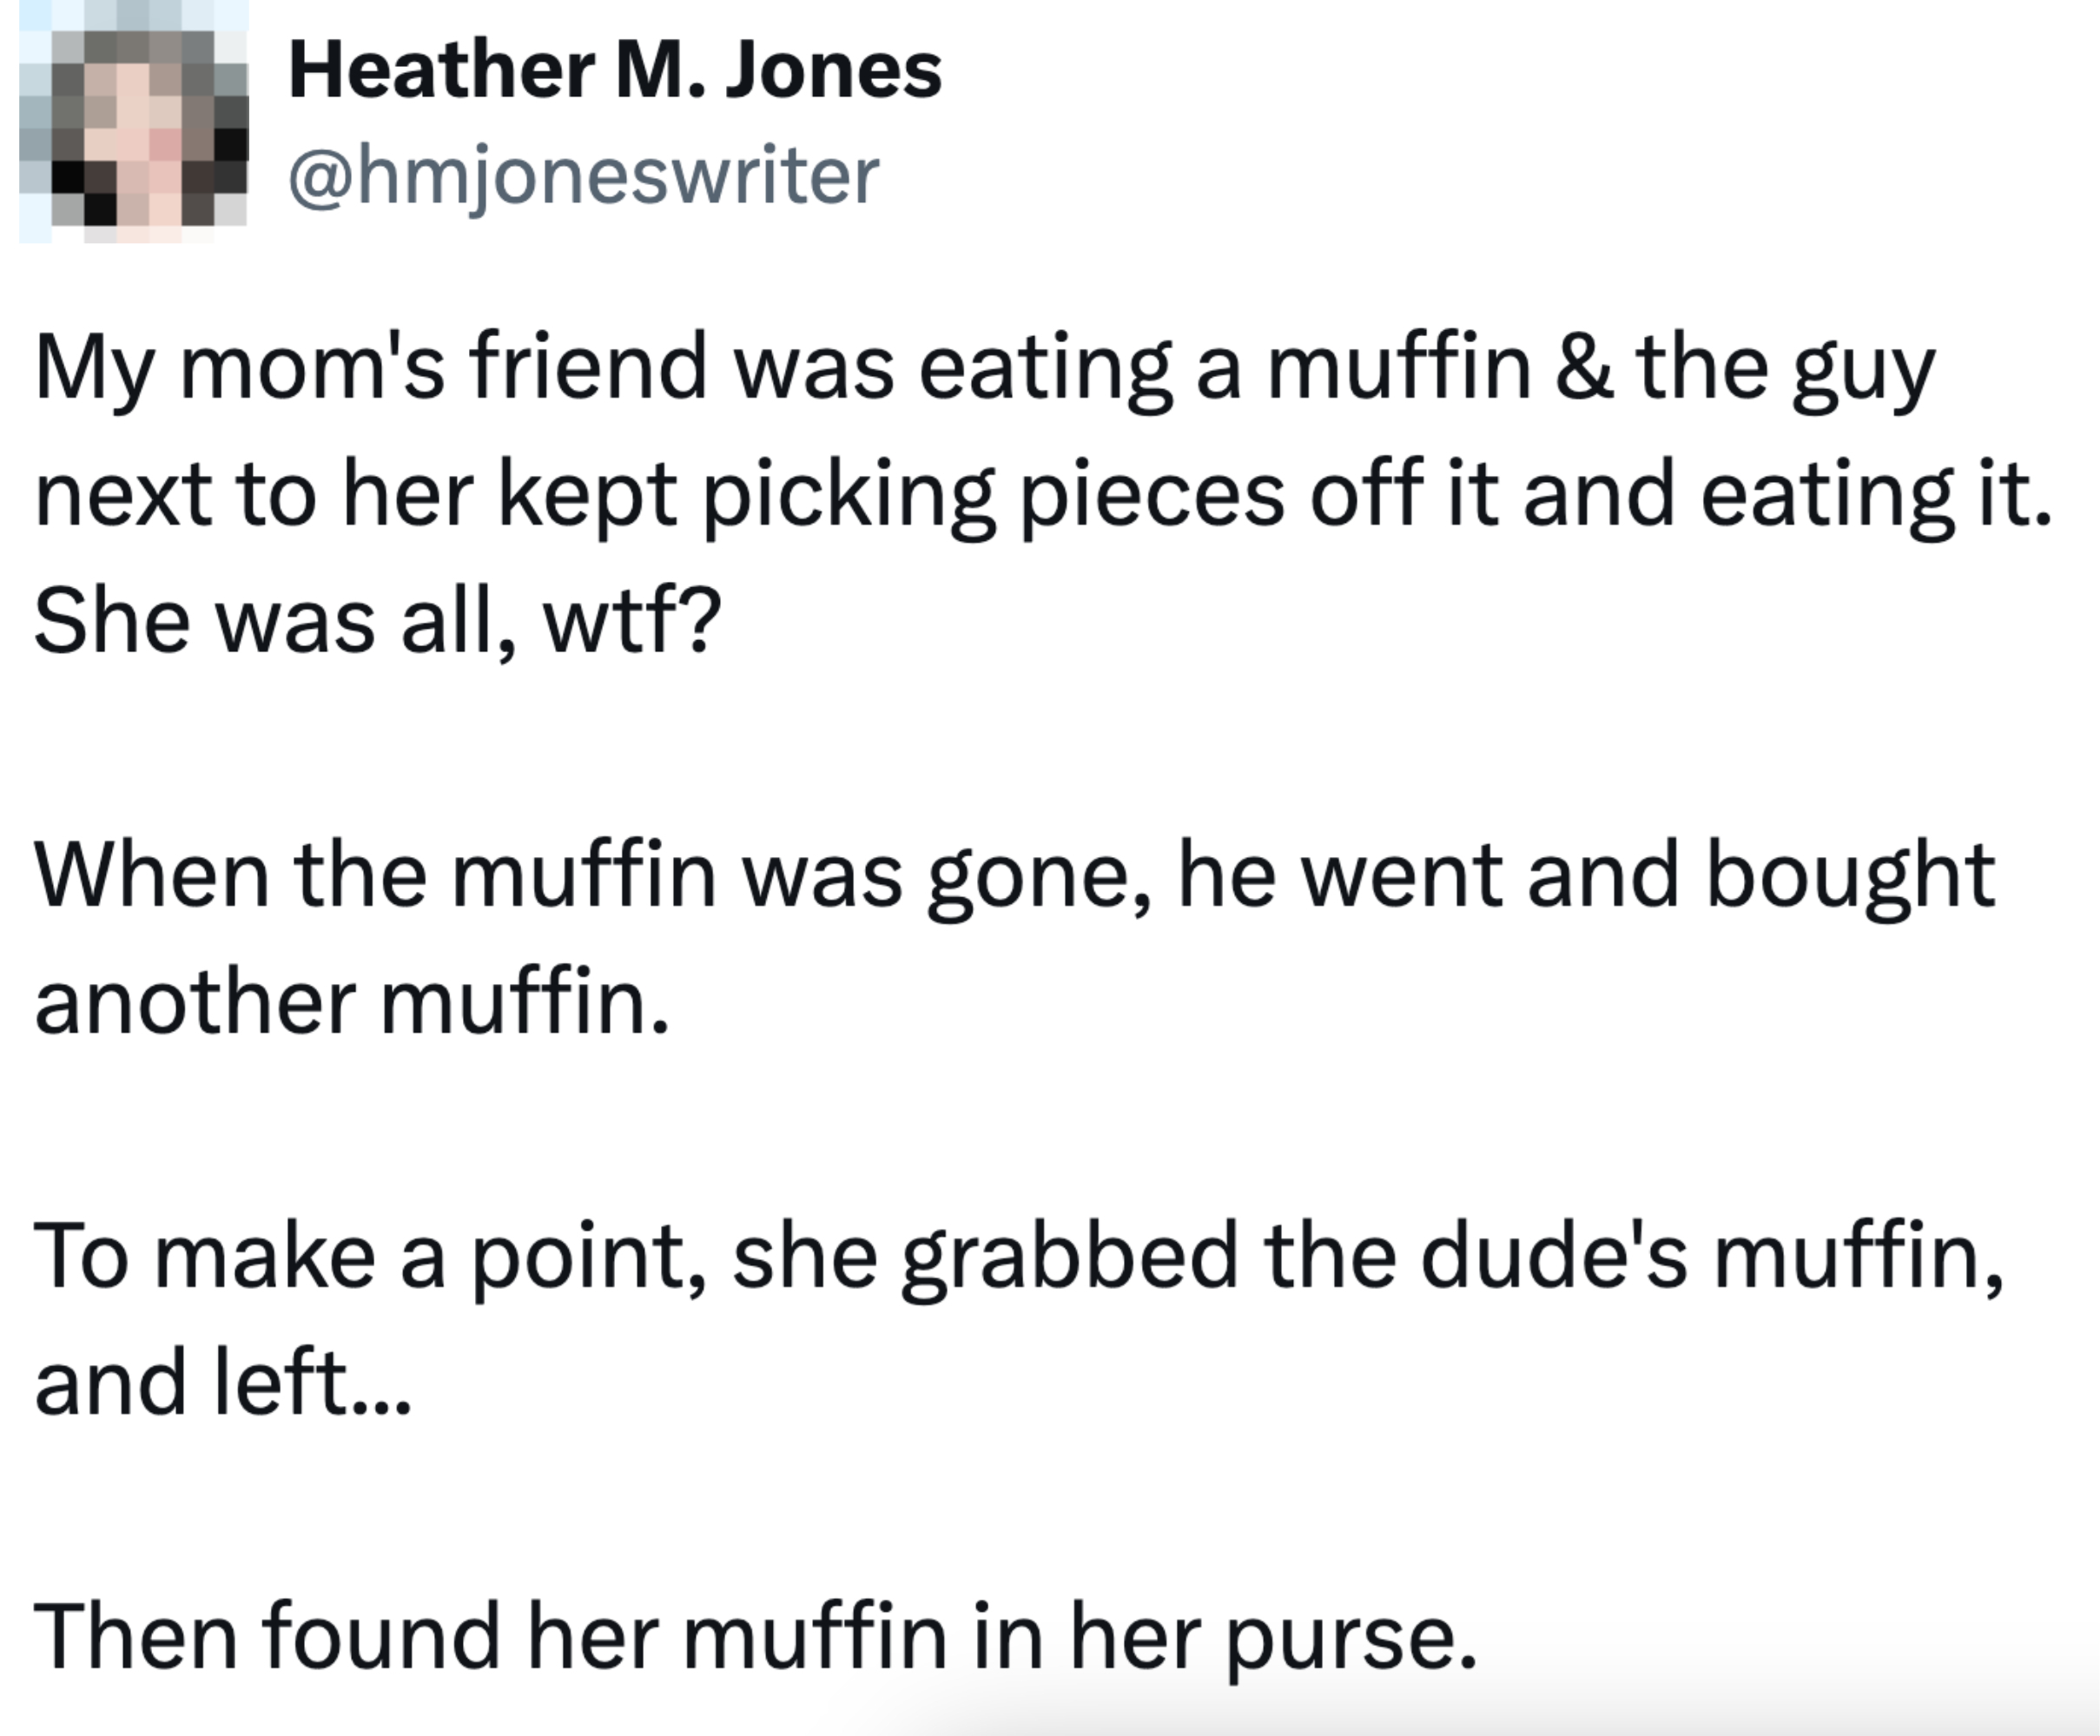 Tweet detailing a humorous story about a mom&#x27;s friend unknowingly eating a bird&#x27;s muffin piece and then replacing it